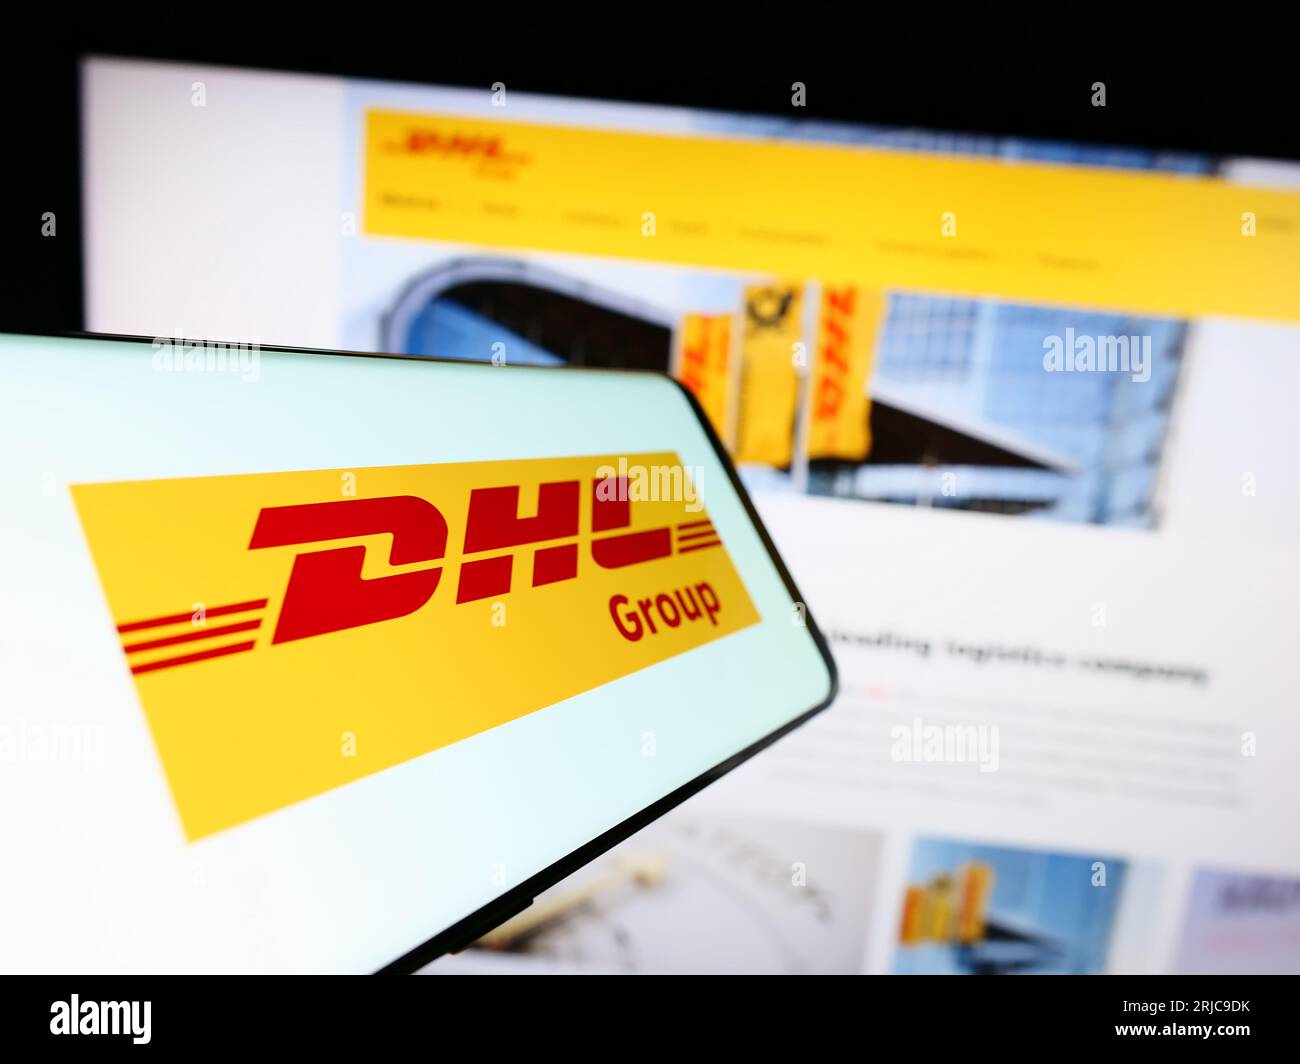 Smartphone with logo of logistics company Deutsche Post AG (DHL Group) on screen in front of website. Focus on center-left of phone display. Stock Photo